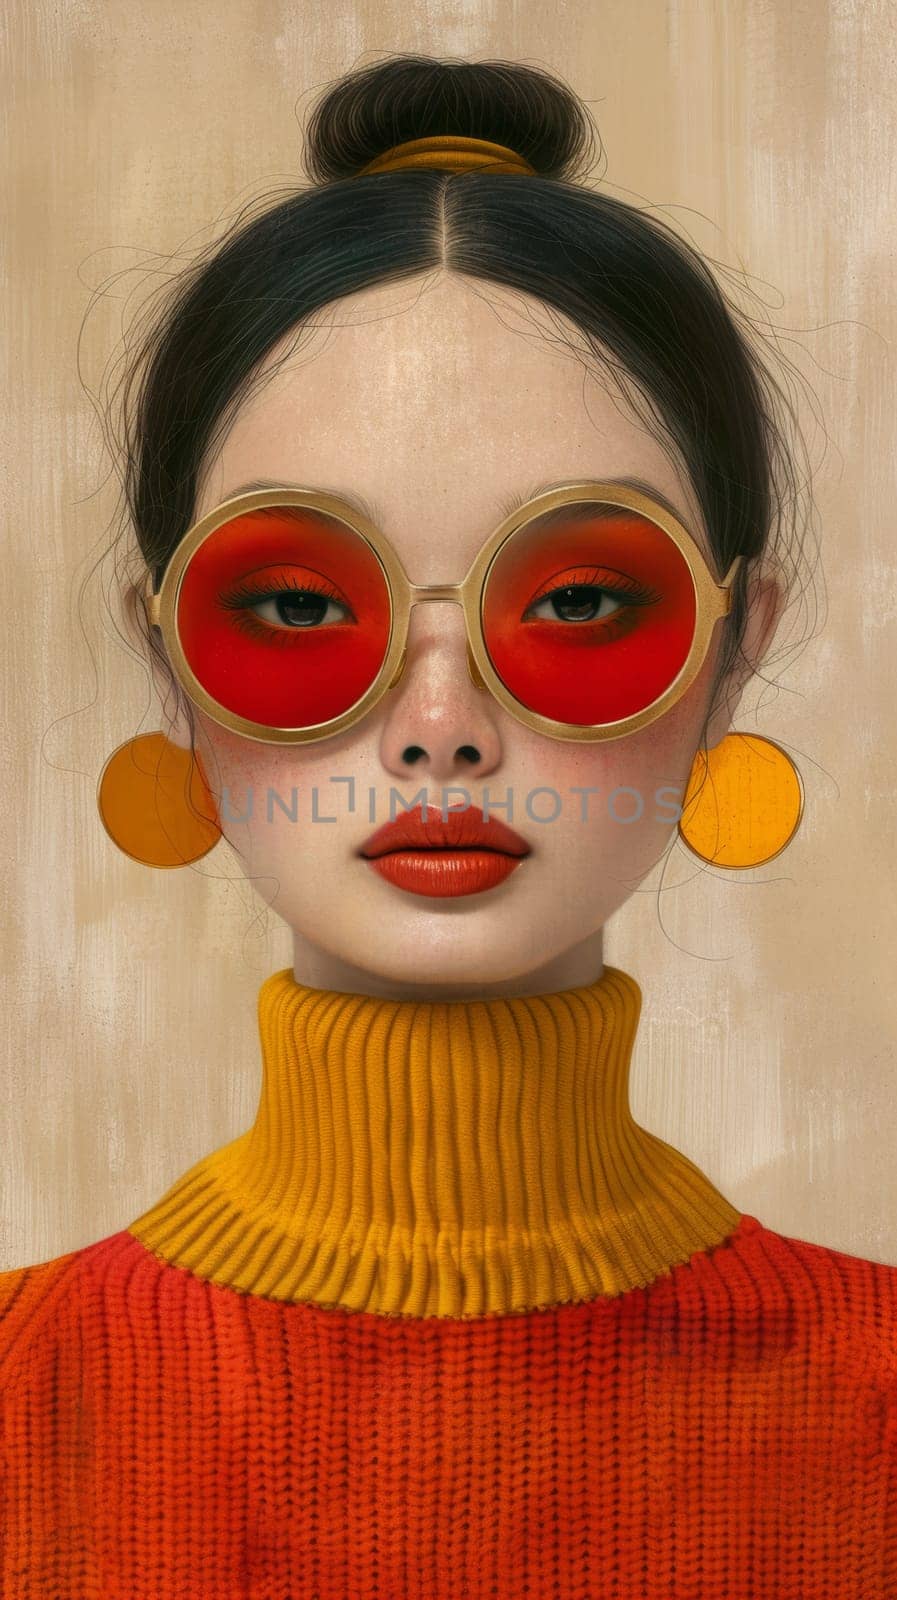 A woman with red lips and a yellow sweater is wearing sunglasses